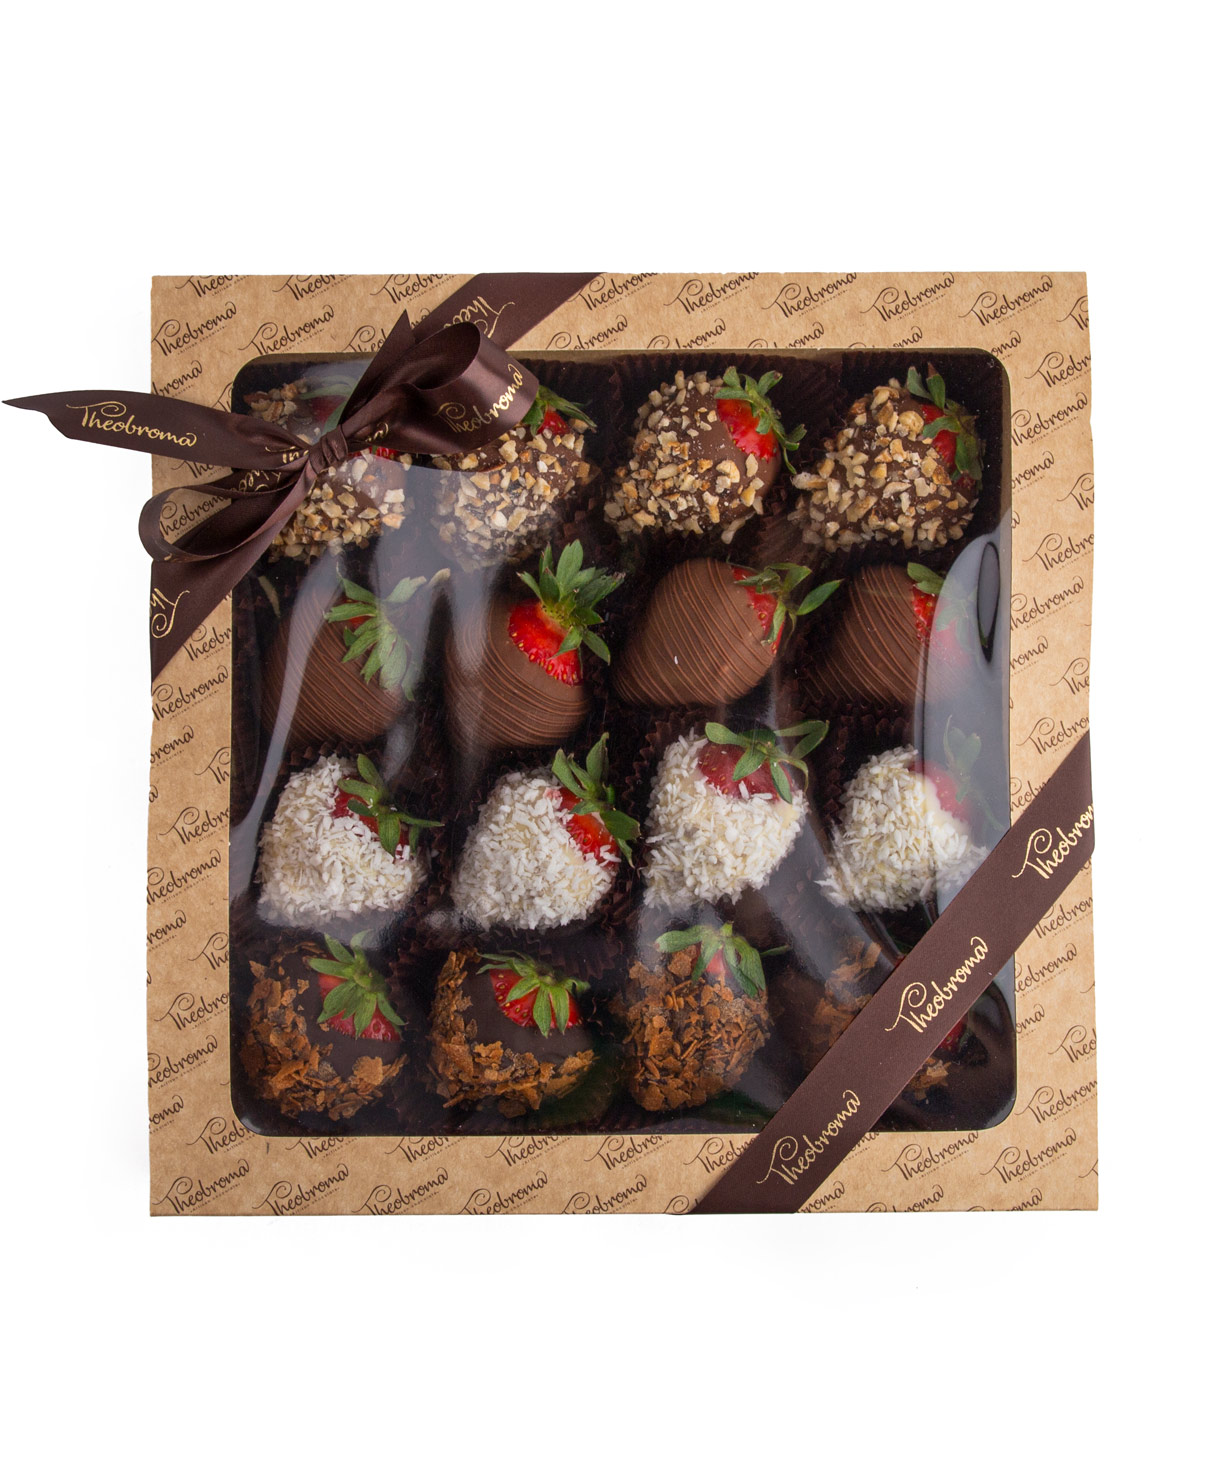 Strawberry `Theobroma` in chocolate with different flavors